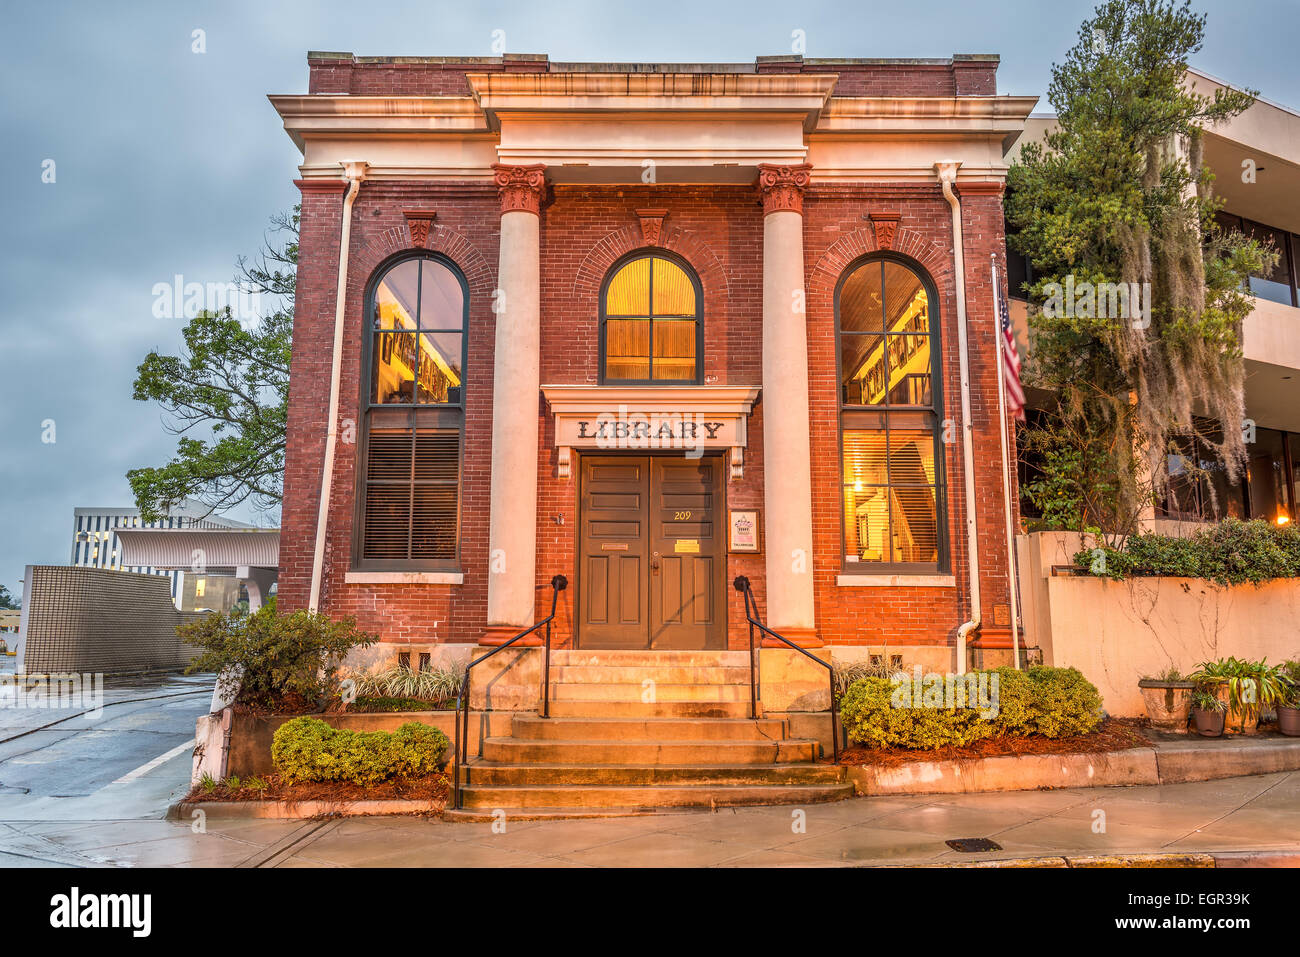 David S. Walker Library (auch bekannt als The University Library) in Tallahassee, Florida, USA Stockfoto